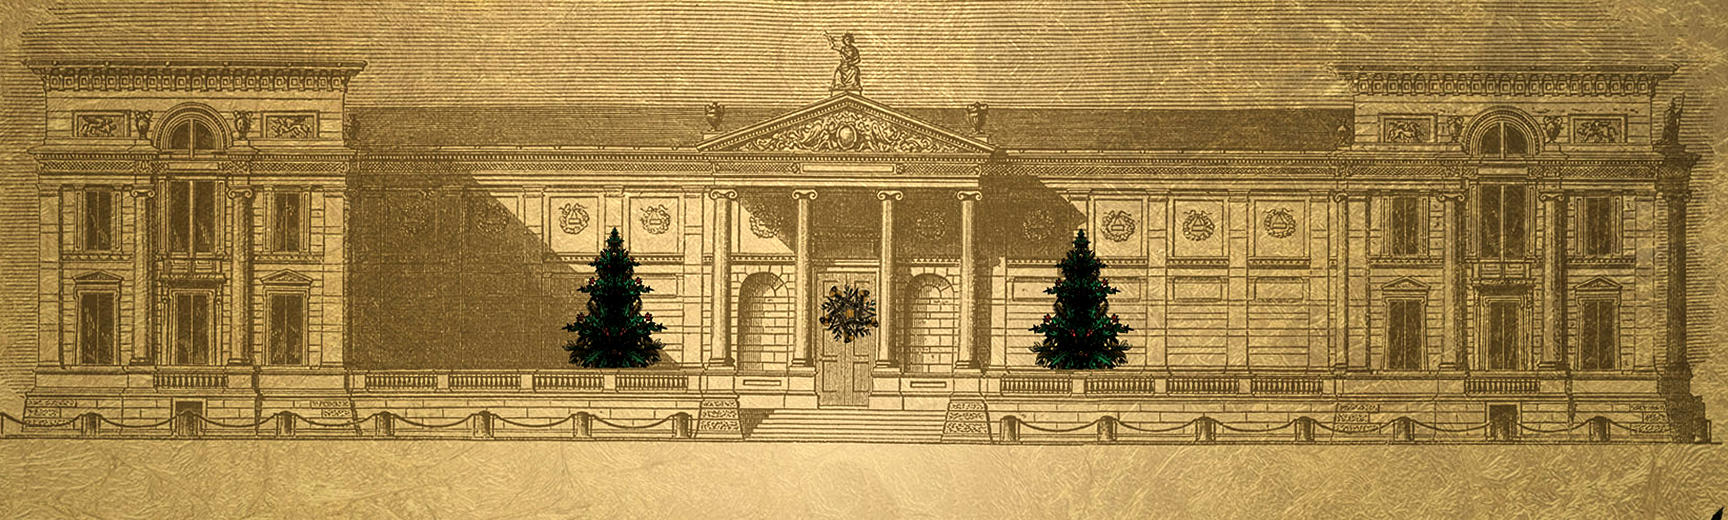 Drawing of the front of the Ashmolean Museum in black and gold, with Christmas trees in front